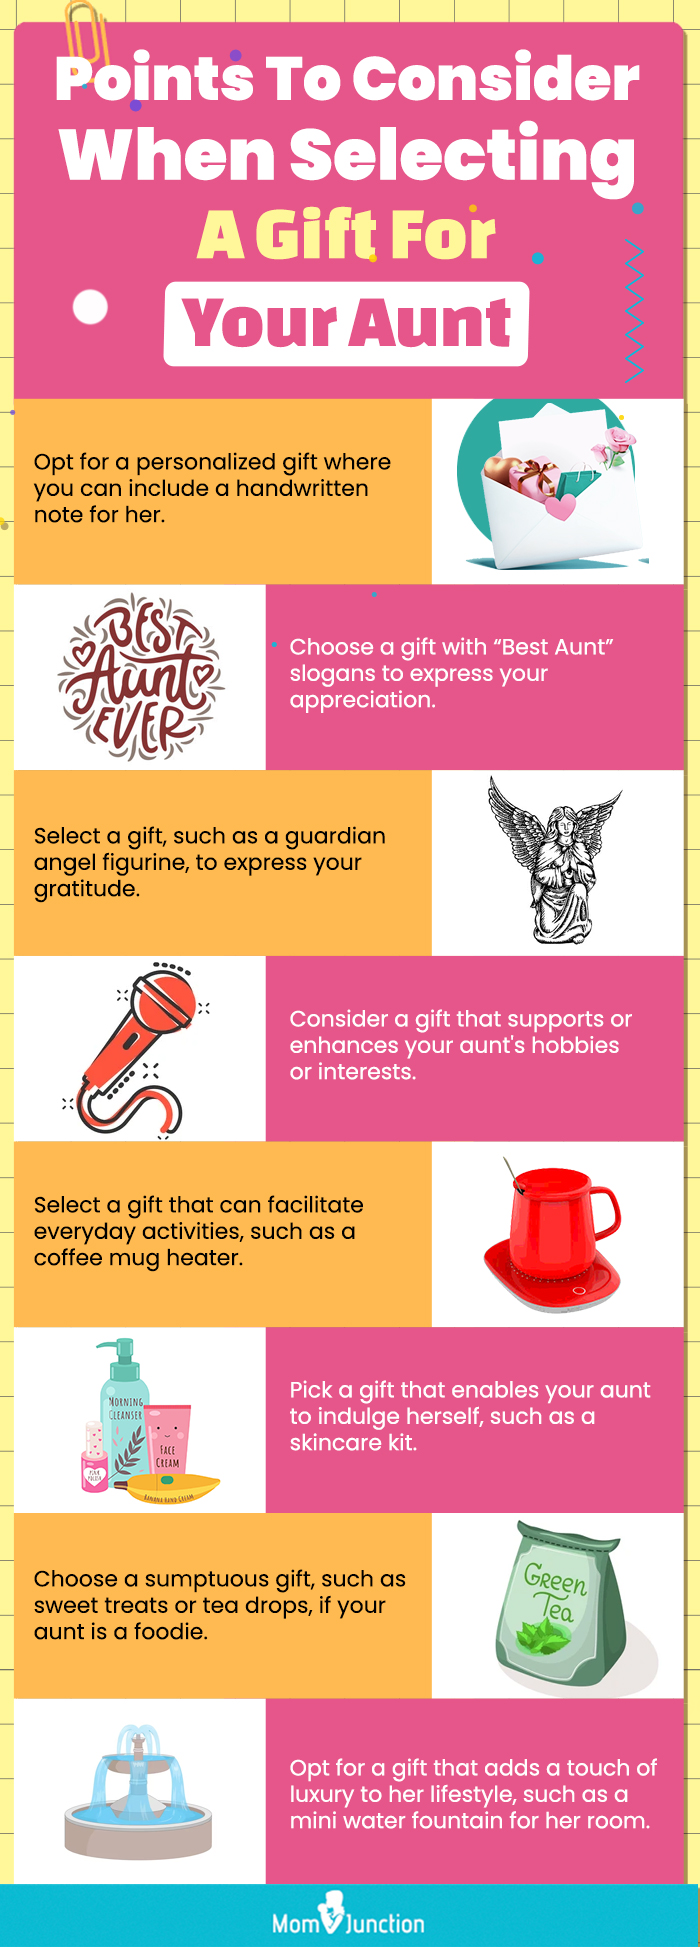 Aunts Deserve the Best: 27 Gift Ideas for Your Cool Aunt - Groovy Girl Gifts